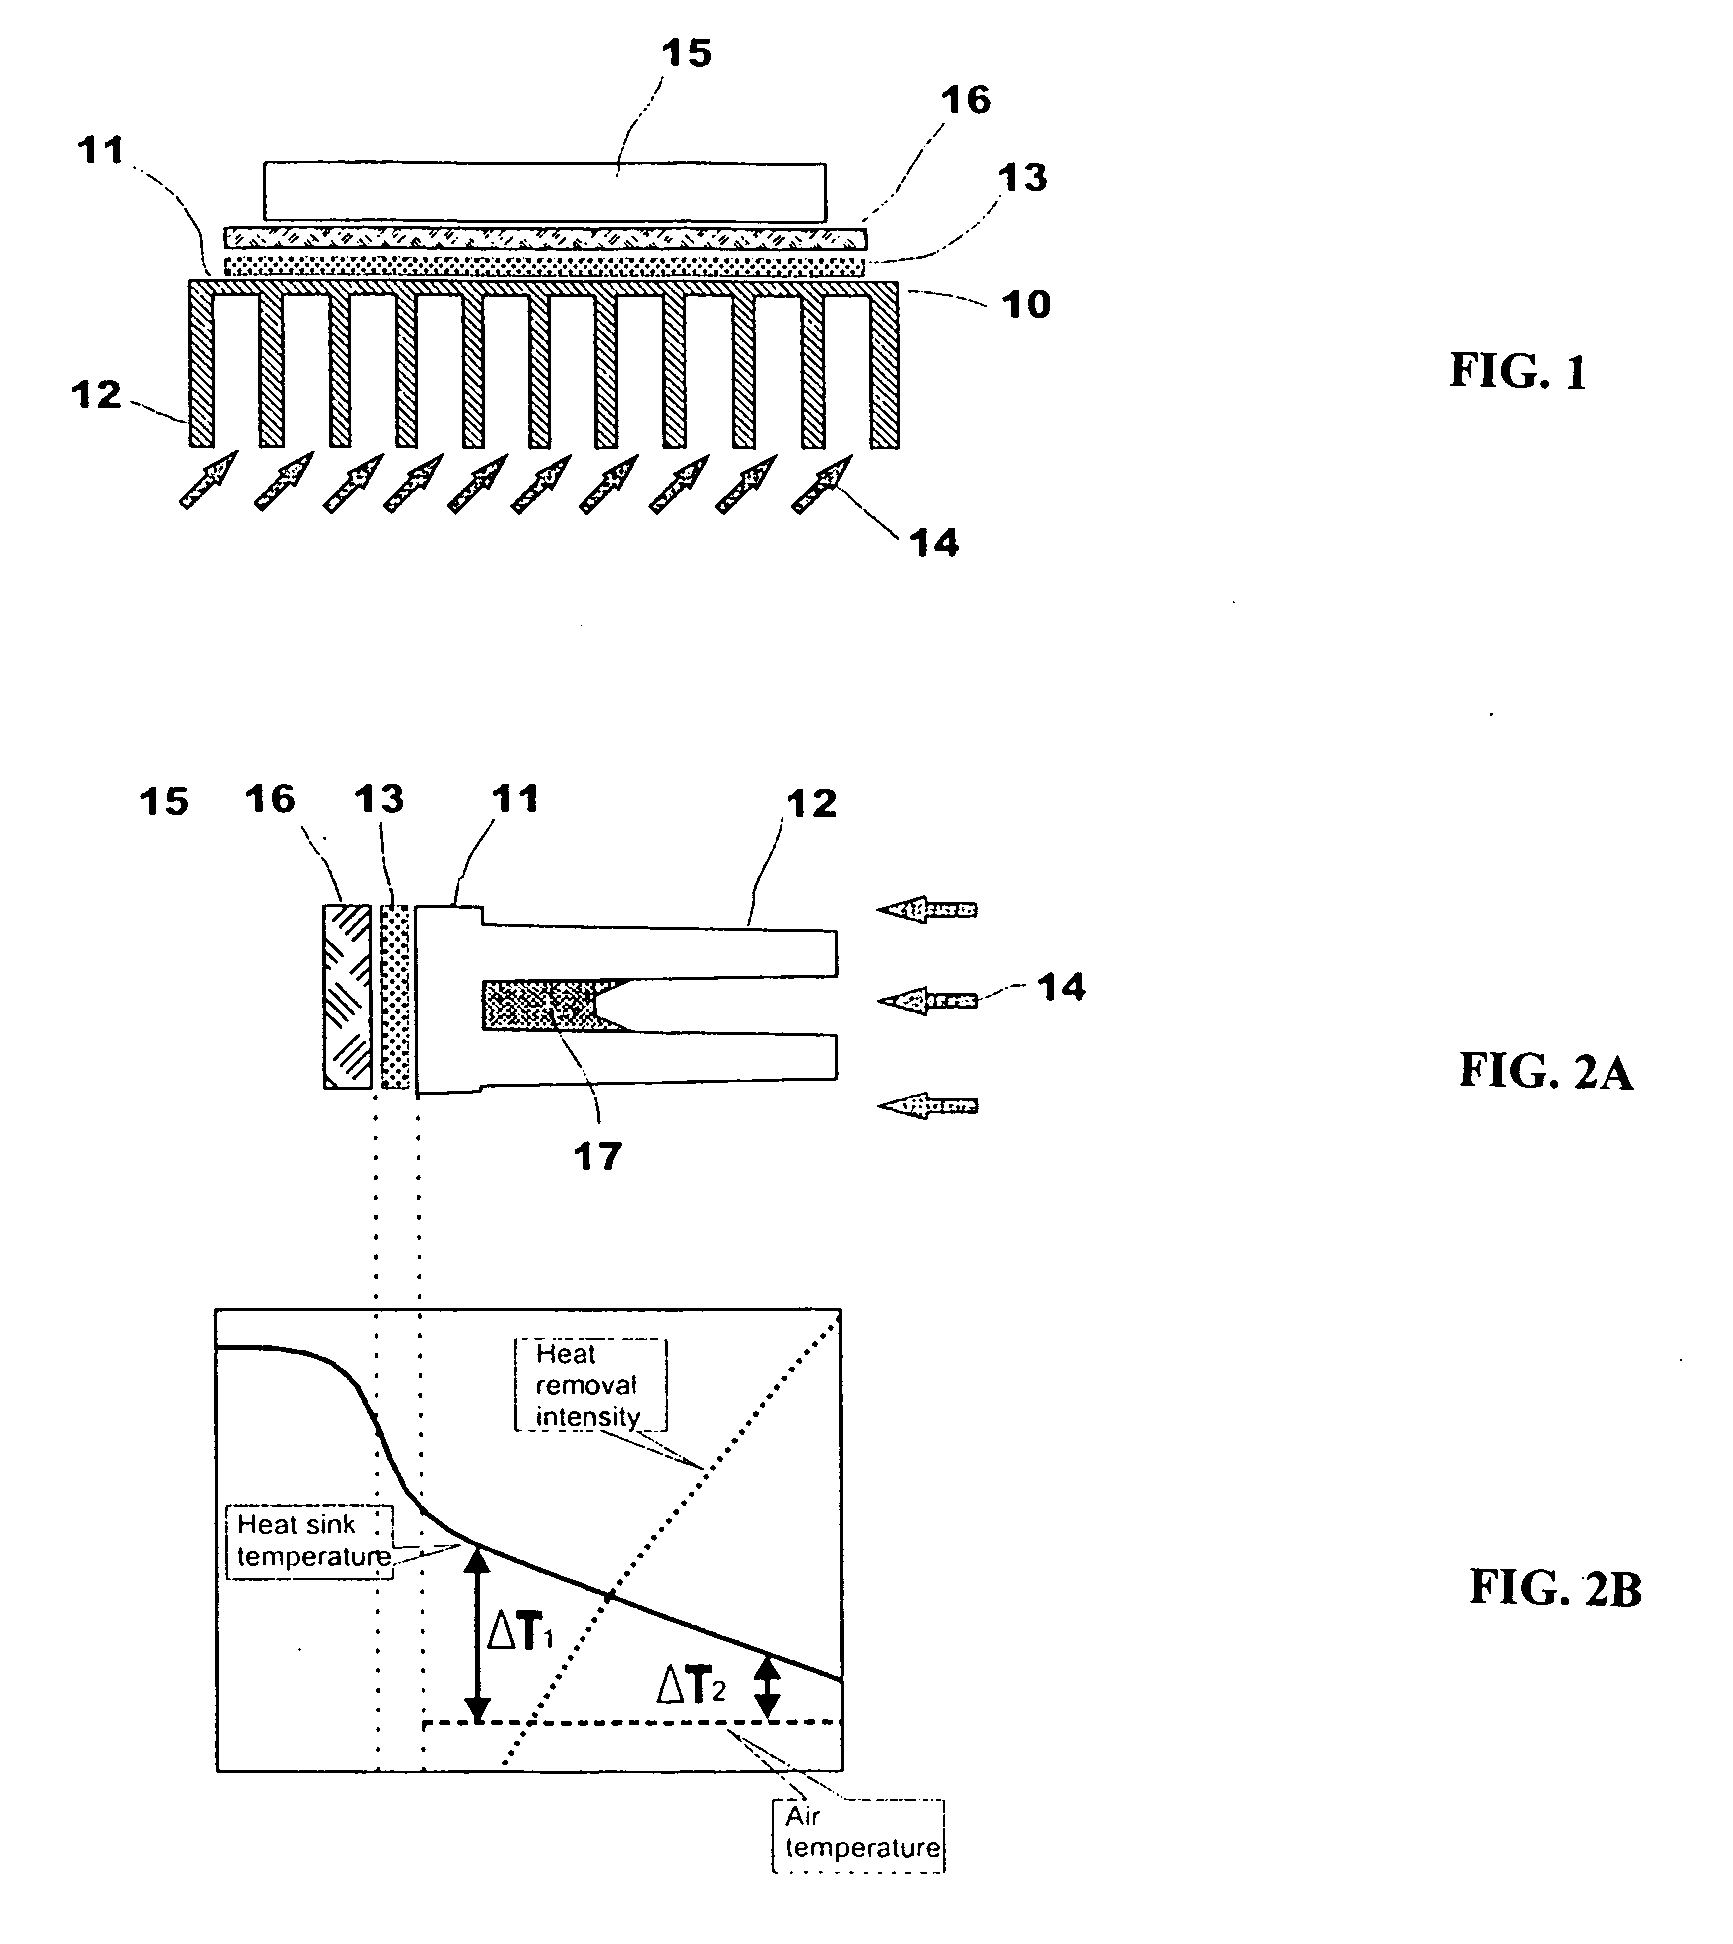 Thermal management system and computer arrangement